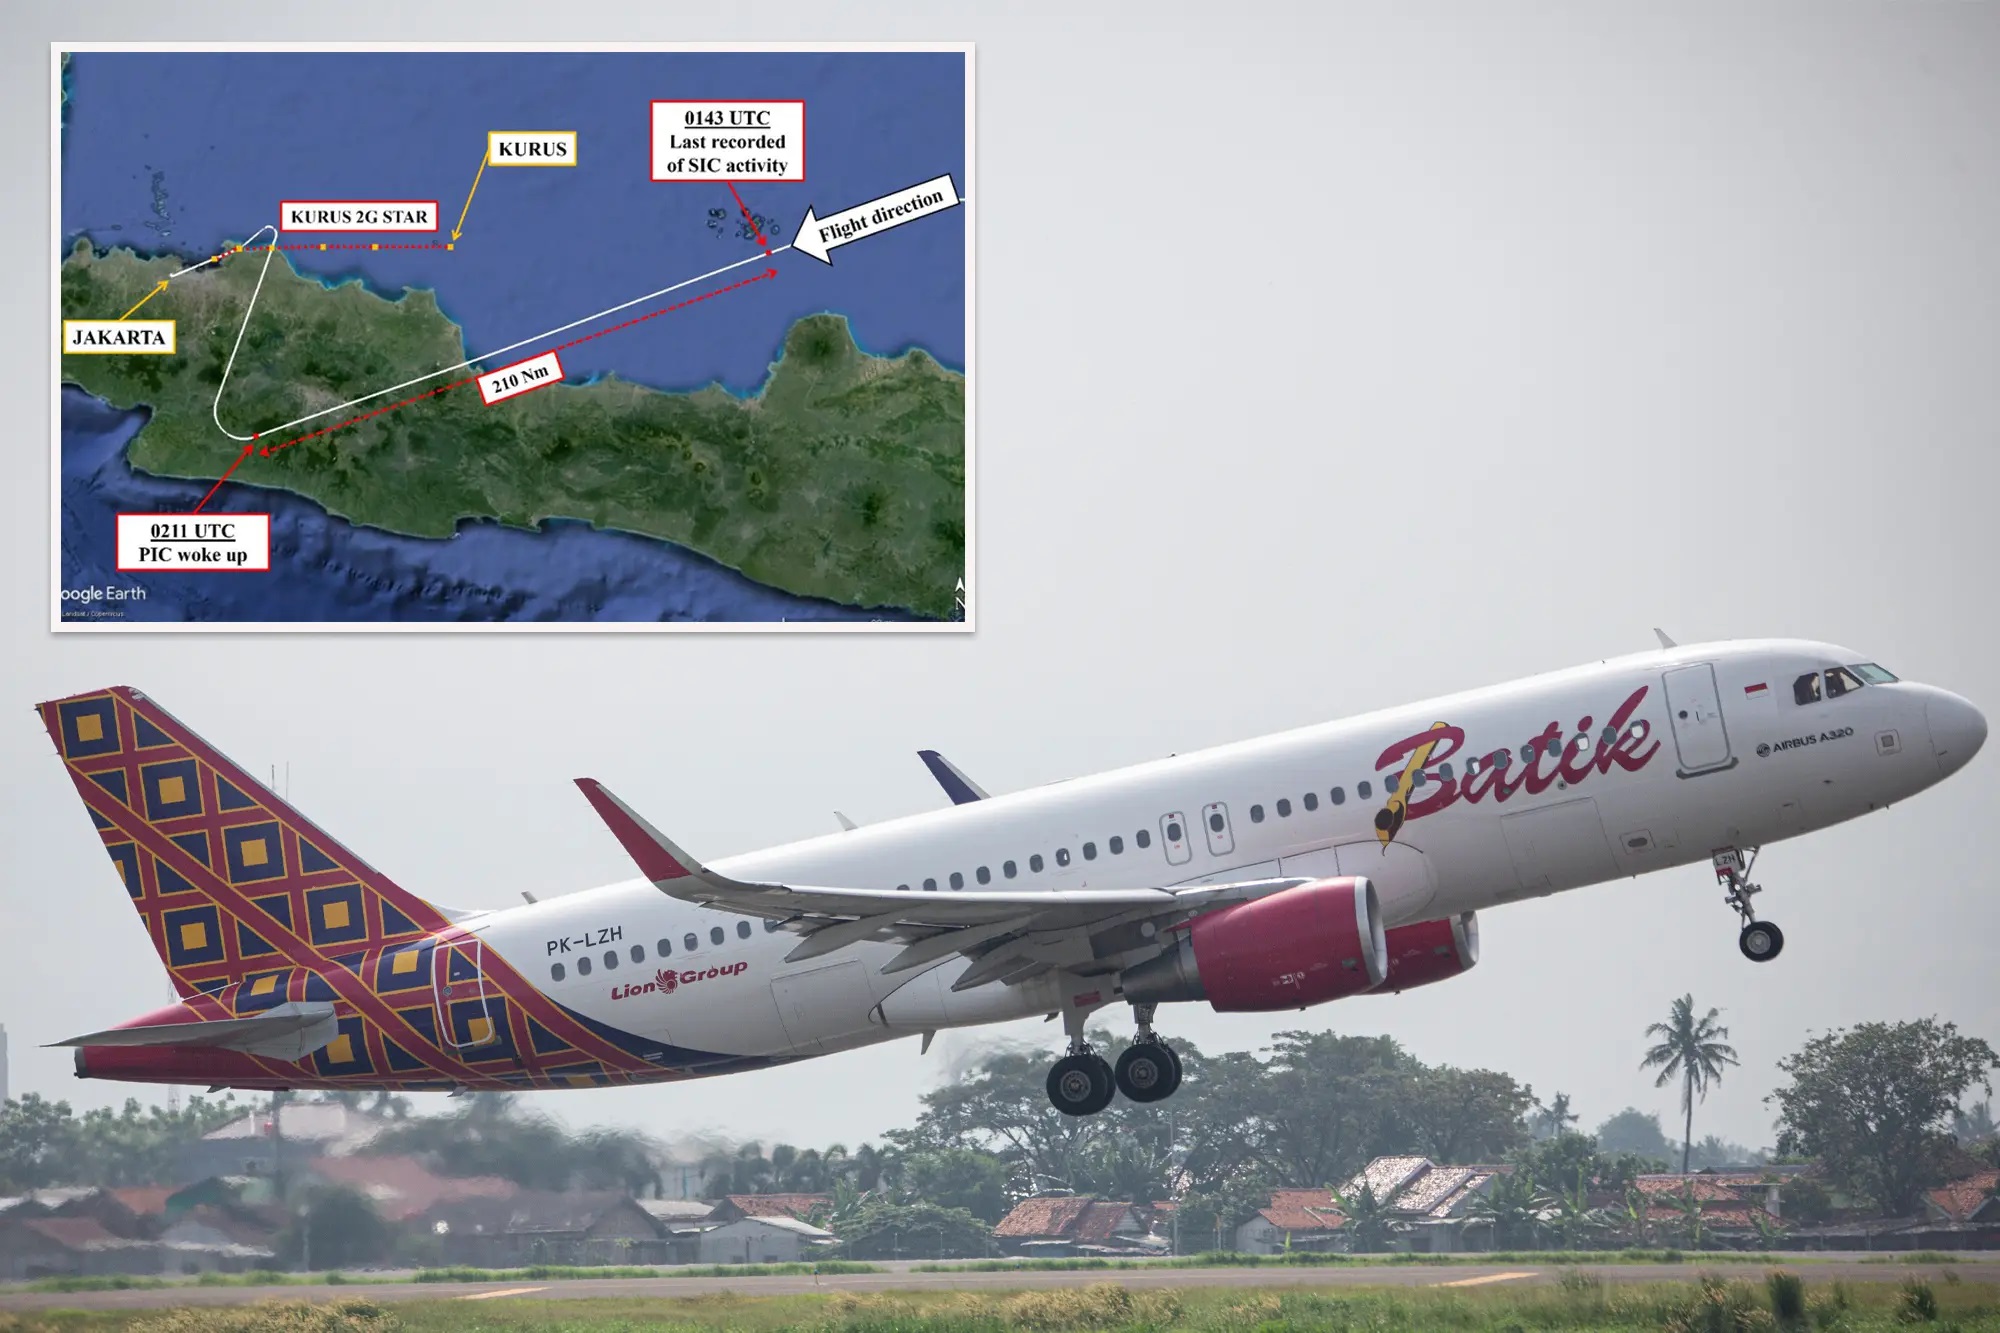 Batik Air Incident: Plane goes astray in Indonesia after both pilots fell asleep for 28 minutes